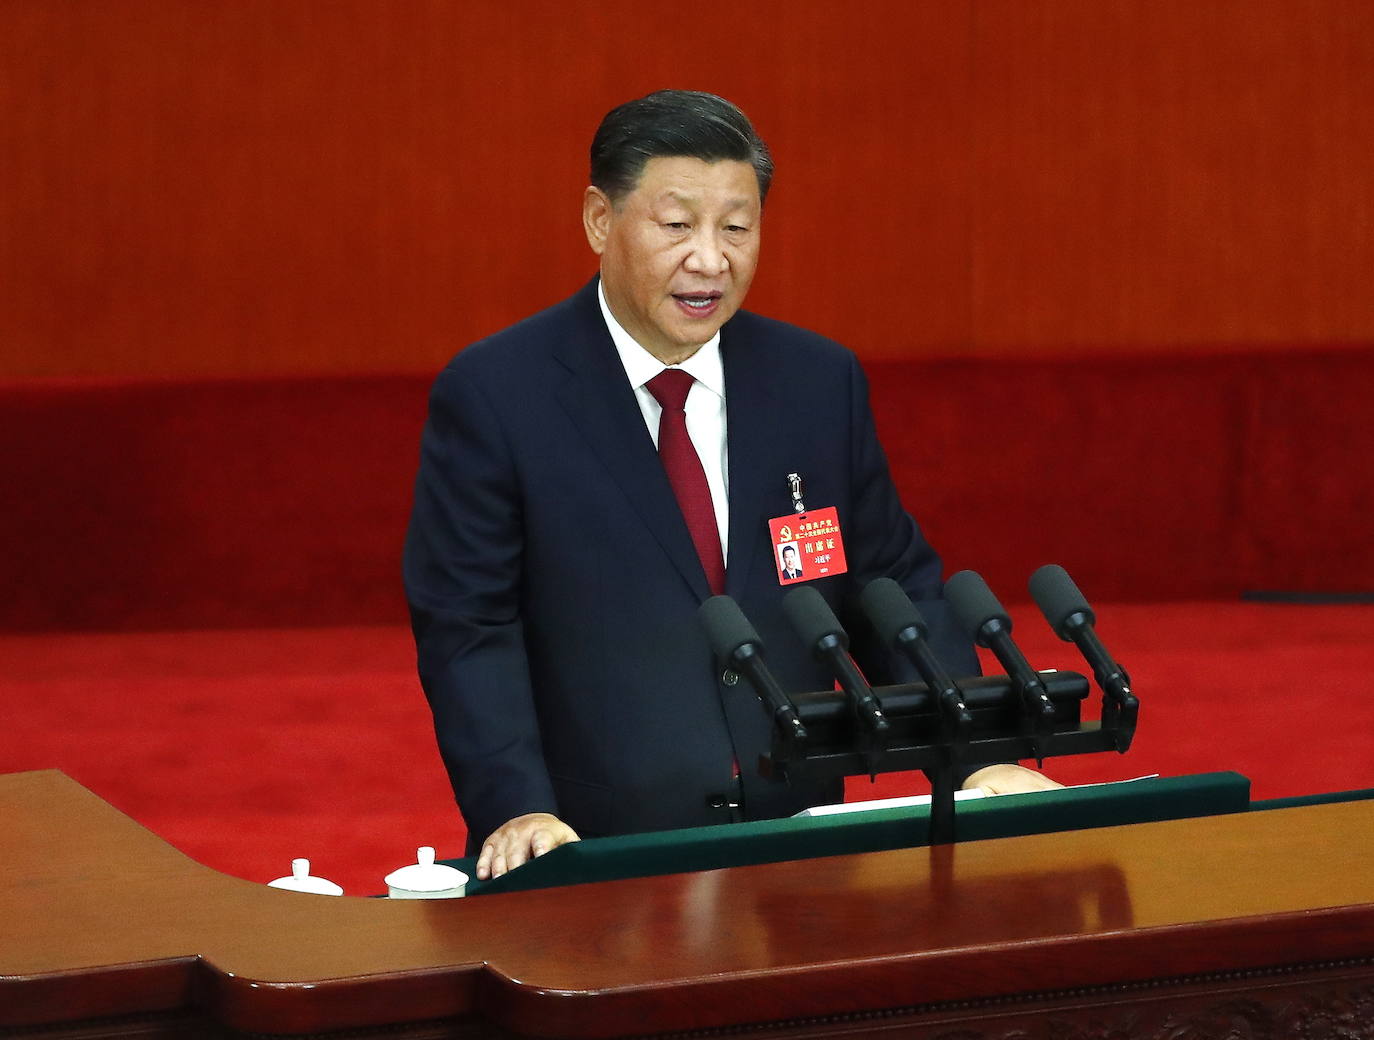 Xi Jinping at the opening of the 20th Congress of the Communist Party of China